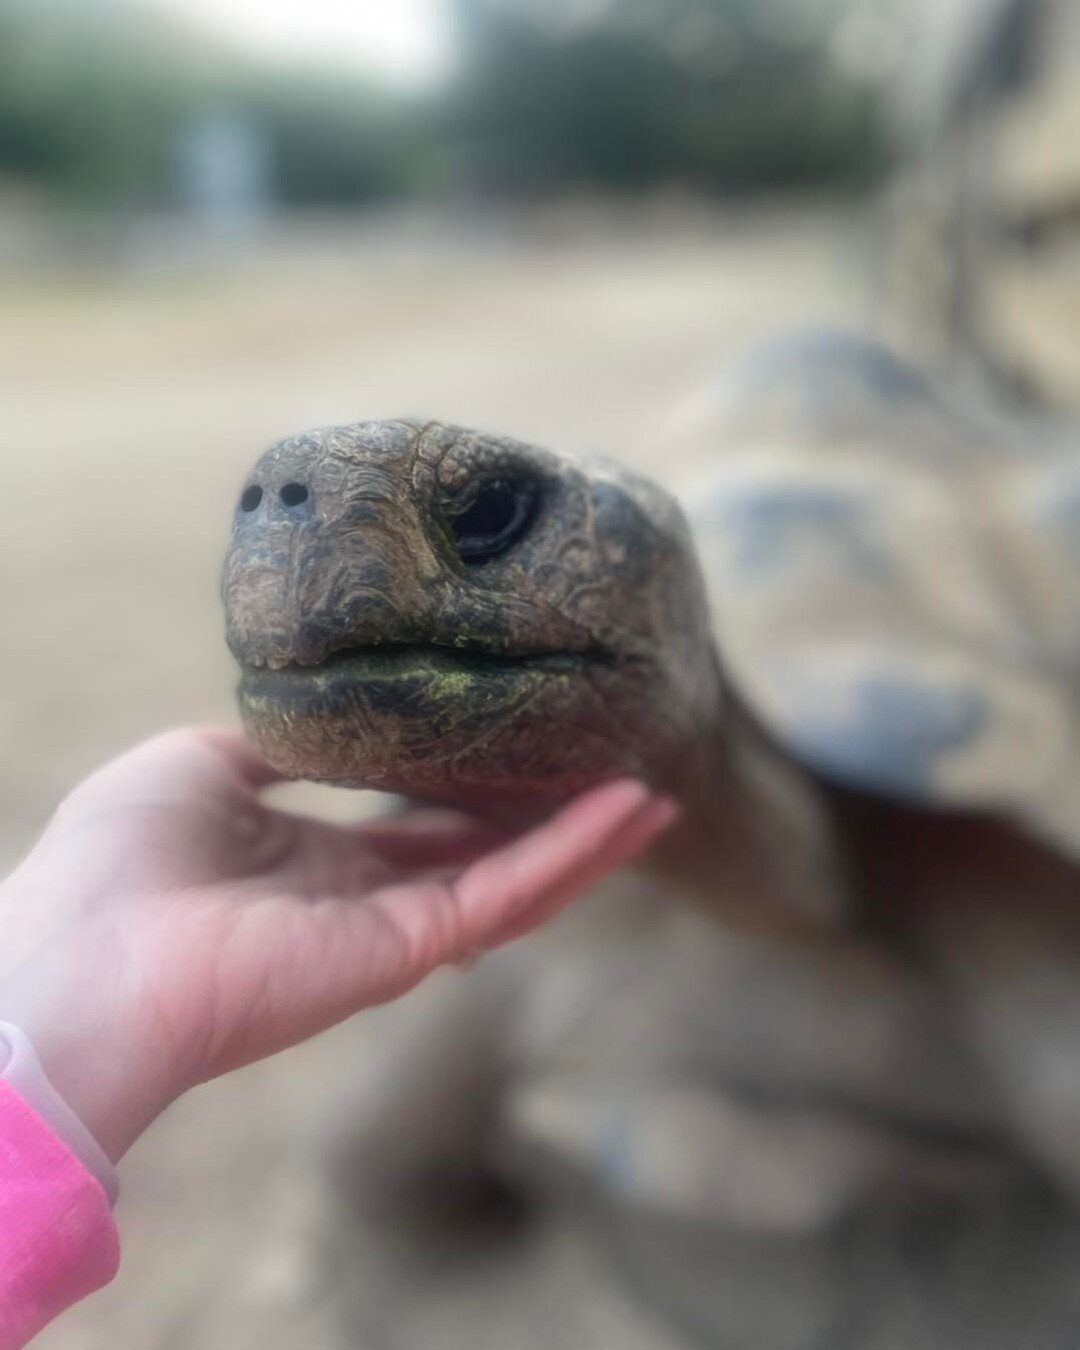 Isabella Galapagos scratches are the best.  #Galapagos #galapagostortoise #galapagos🐢 #isabellagalap #izzygalap #mygirl #cuteface #galapscratches #myheart